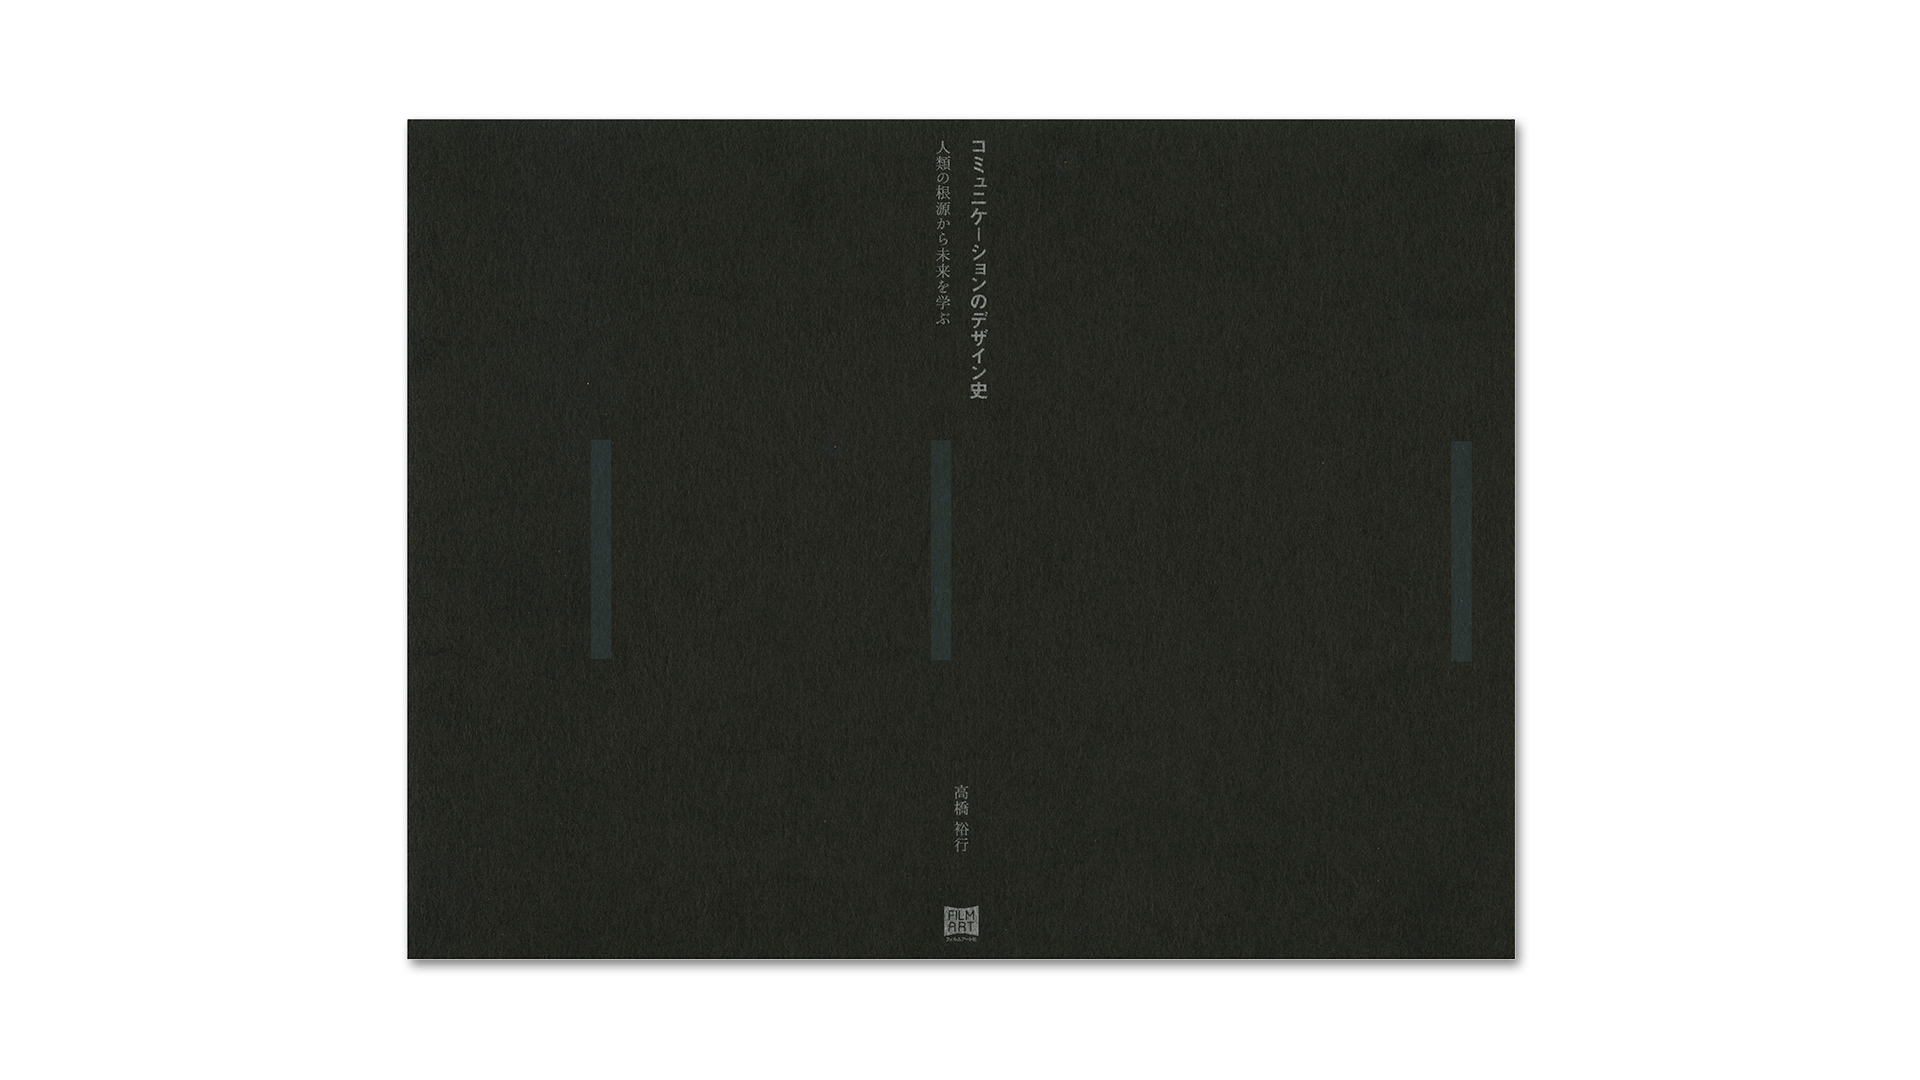 Book Front Cover Design for [History of Communication Design by Hiroshi Takahashi]